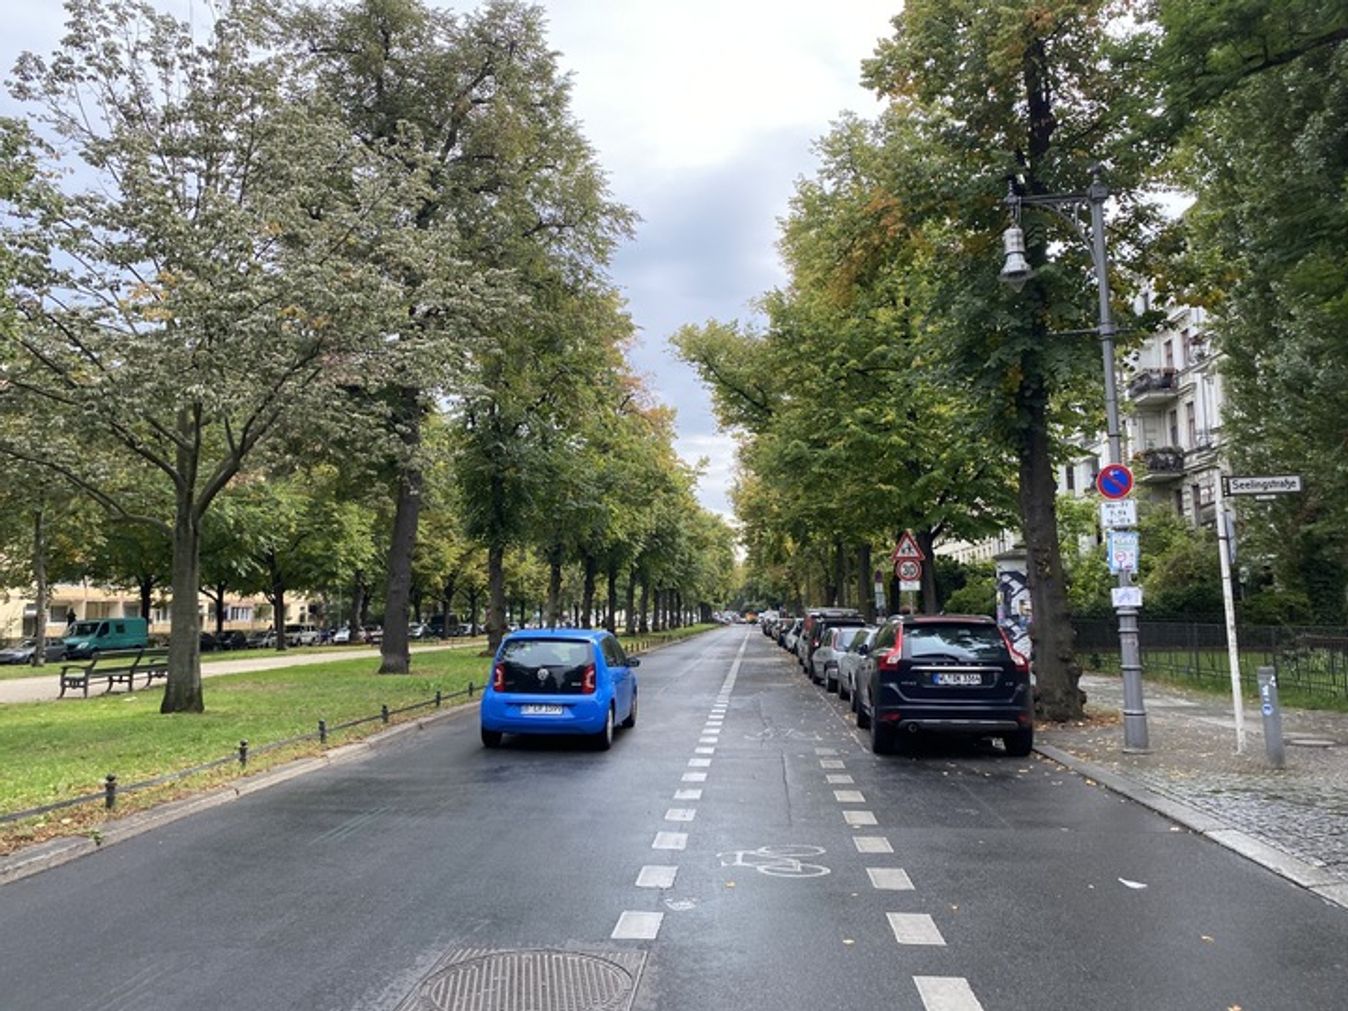 A cycle lane in Berlin